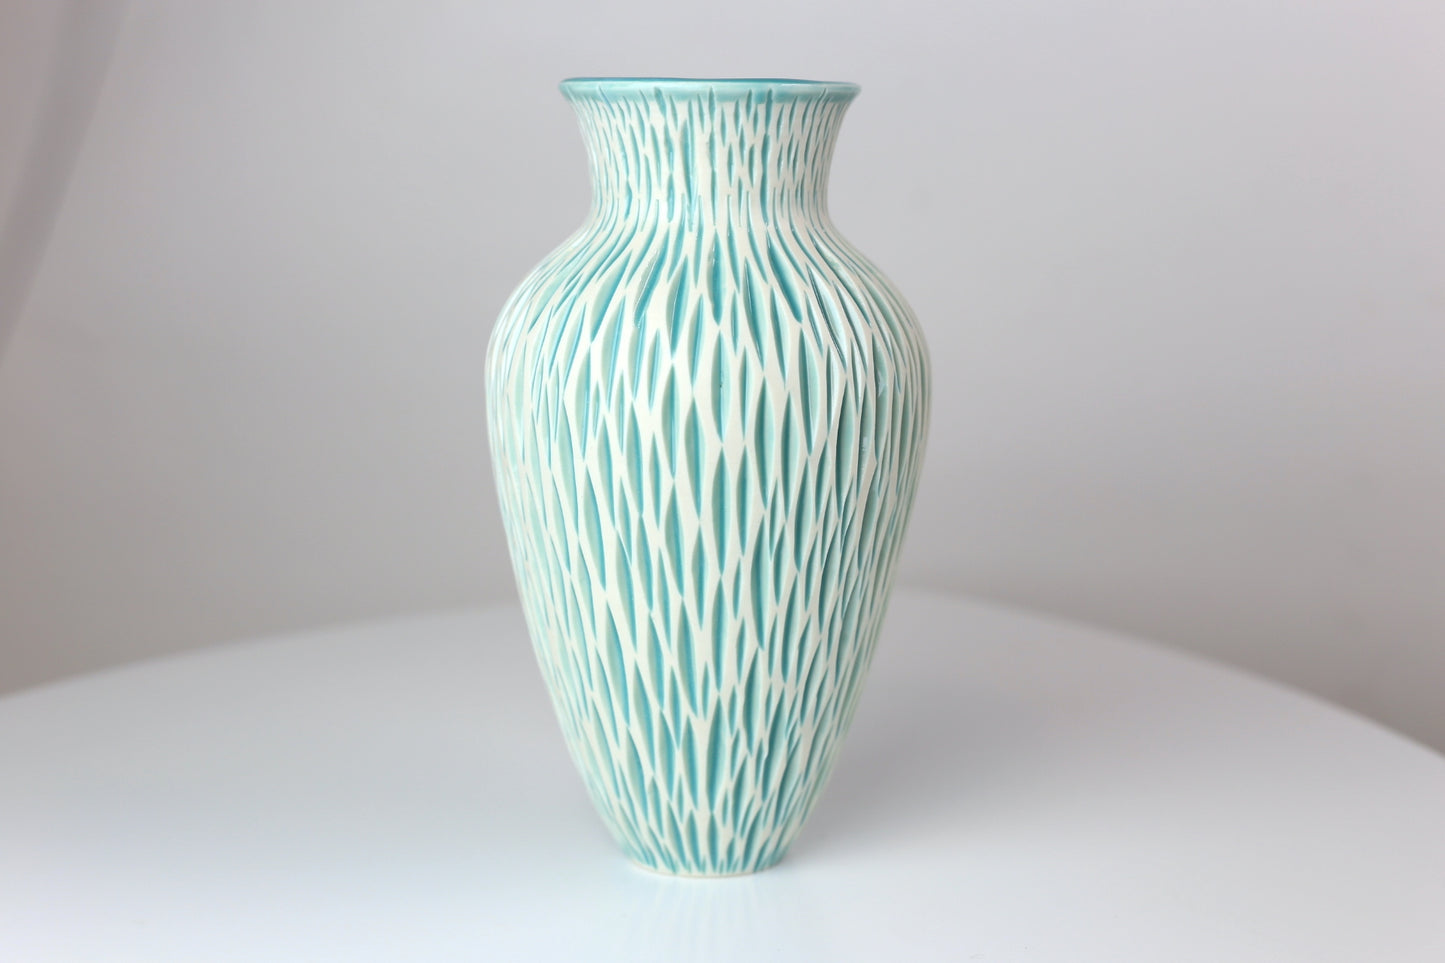 Porcelain vase with geometric carvings in turquoise